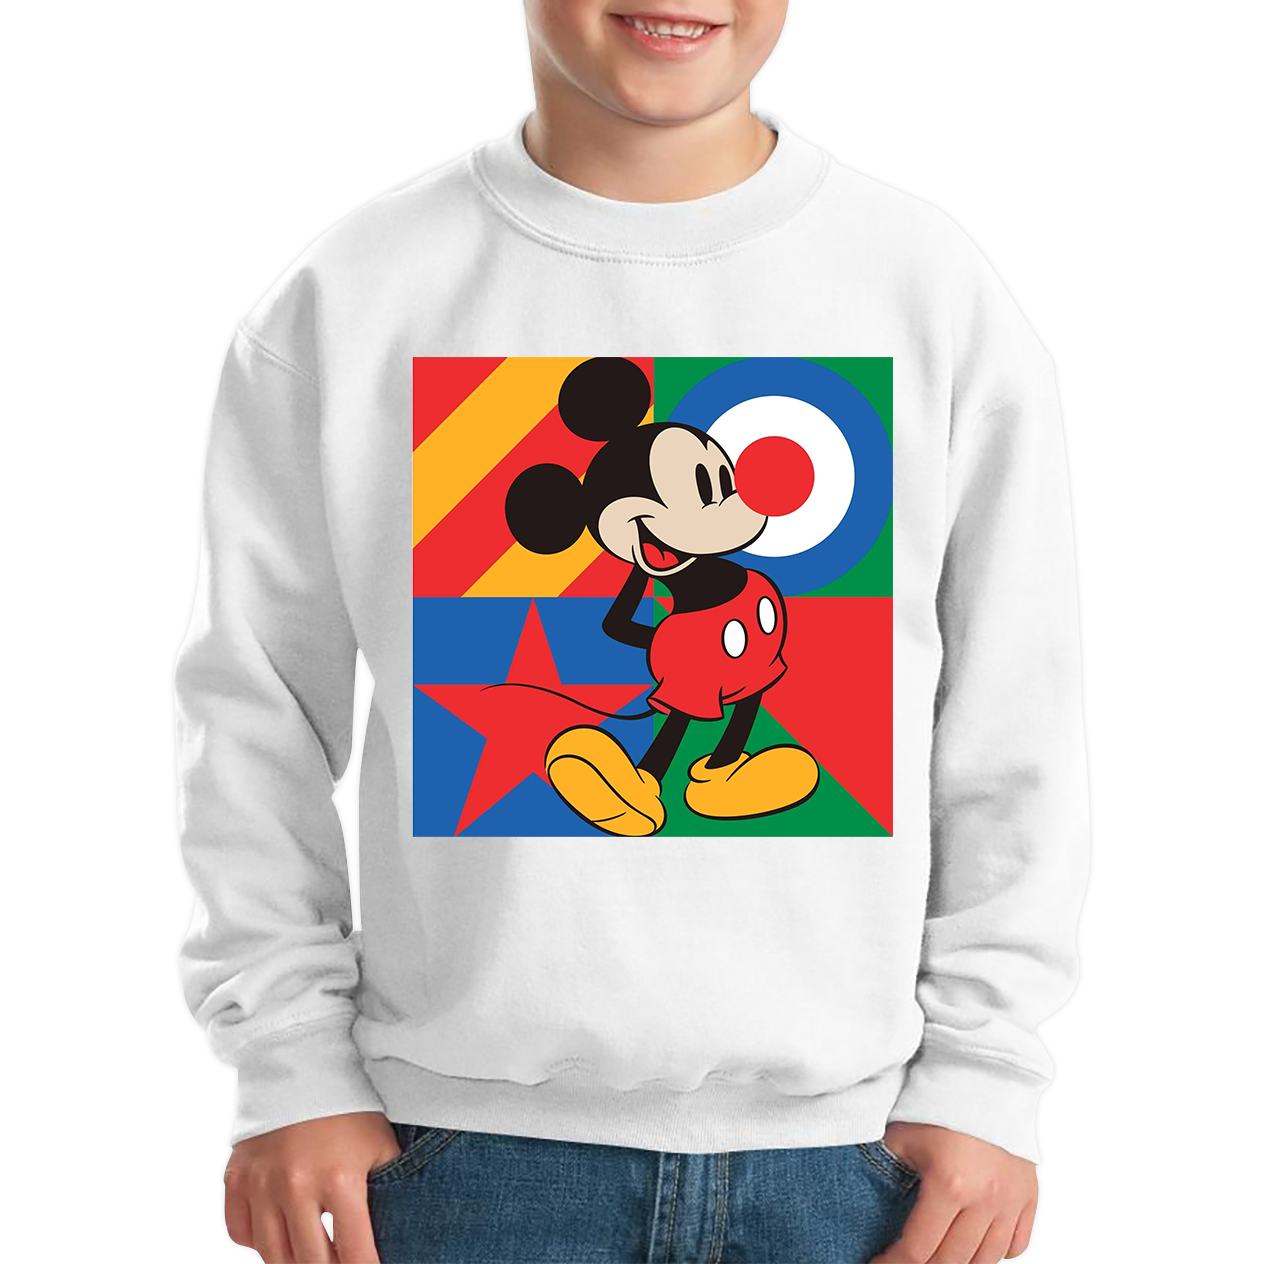 Mickey Mouse Disney Red Nose Day Kids Sweatshirt. 50% Goes To Charity